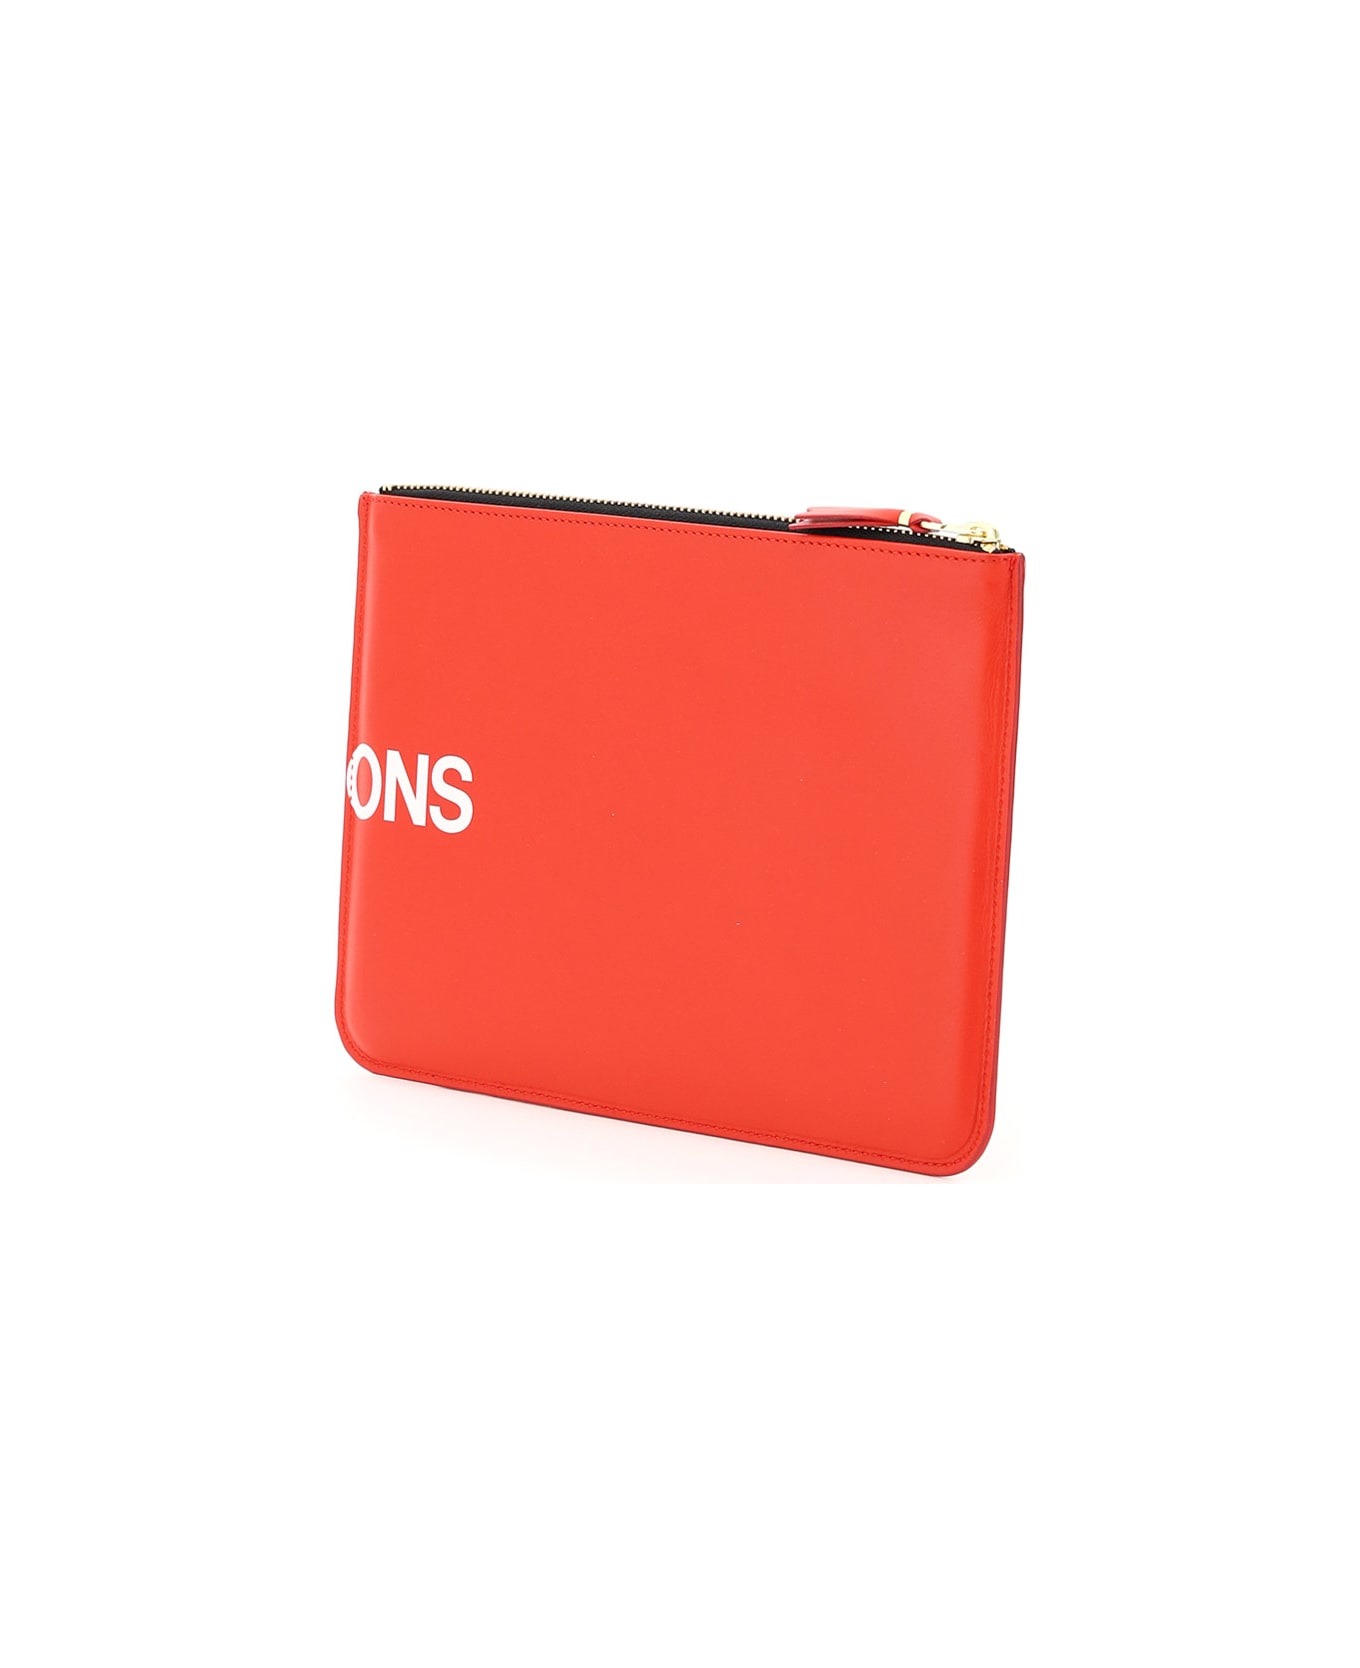 Comme des Garçons Wallet Leather Pouch With Logo - RED (Red)